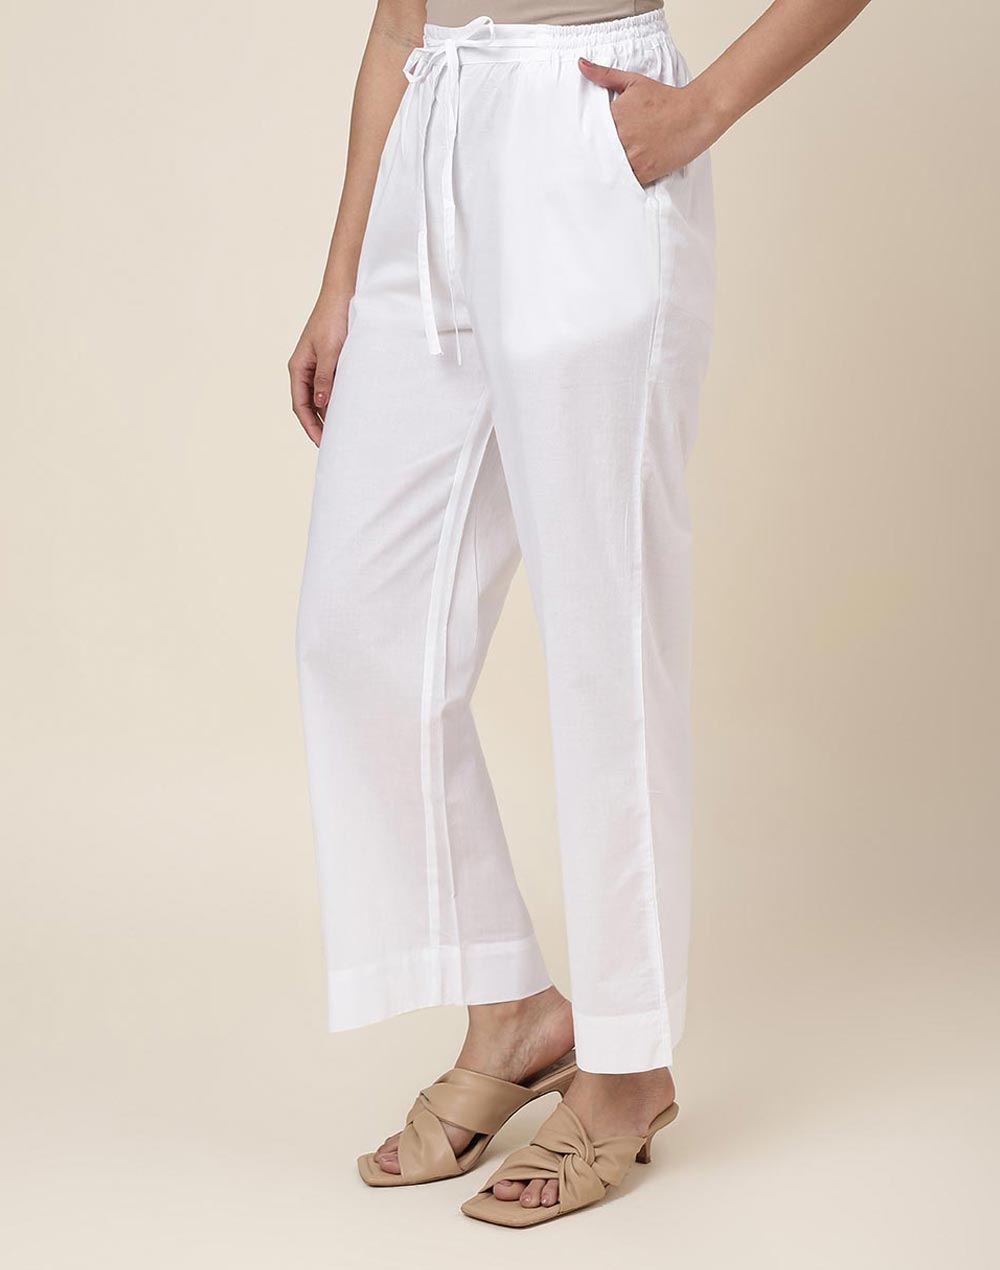 White Cotton Full Length Casual Pant